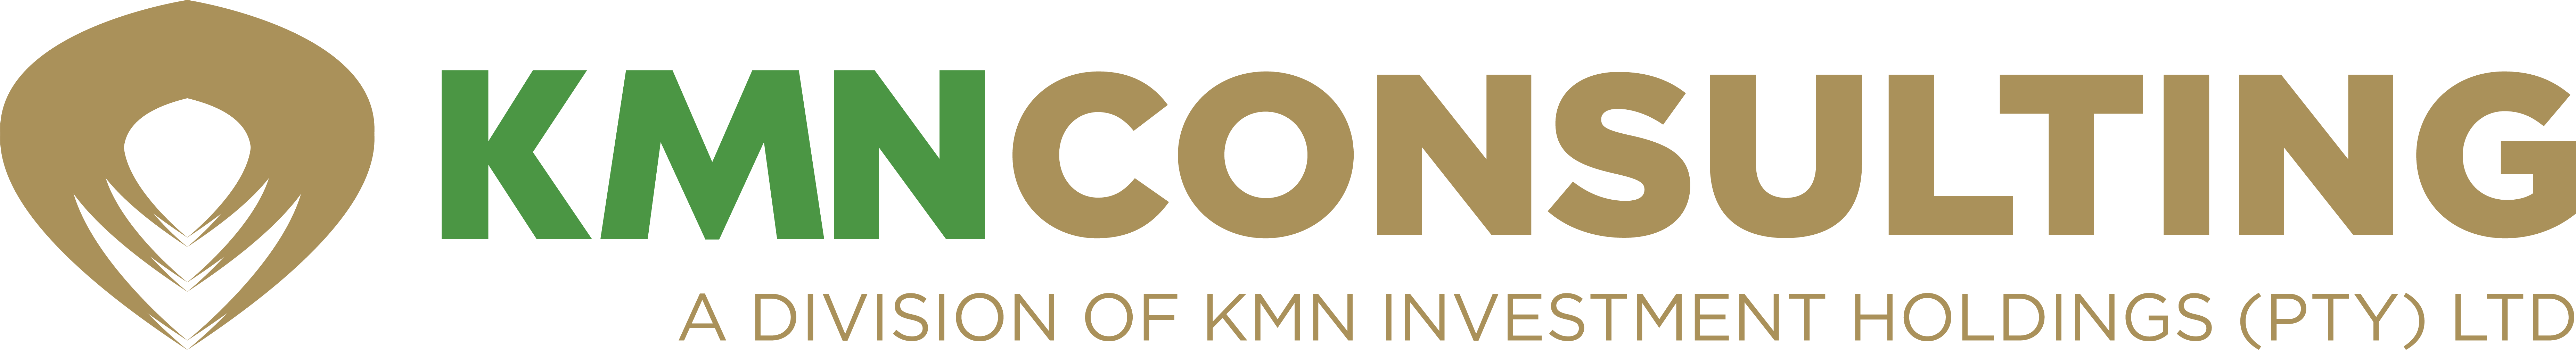 KMN Consulting